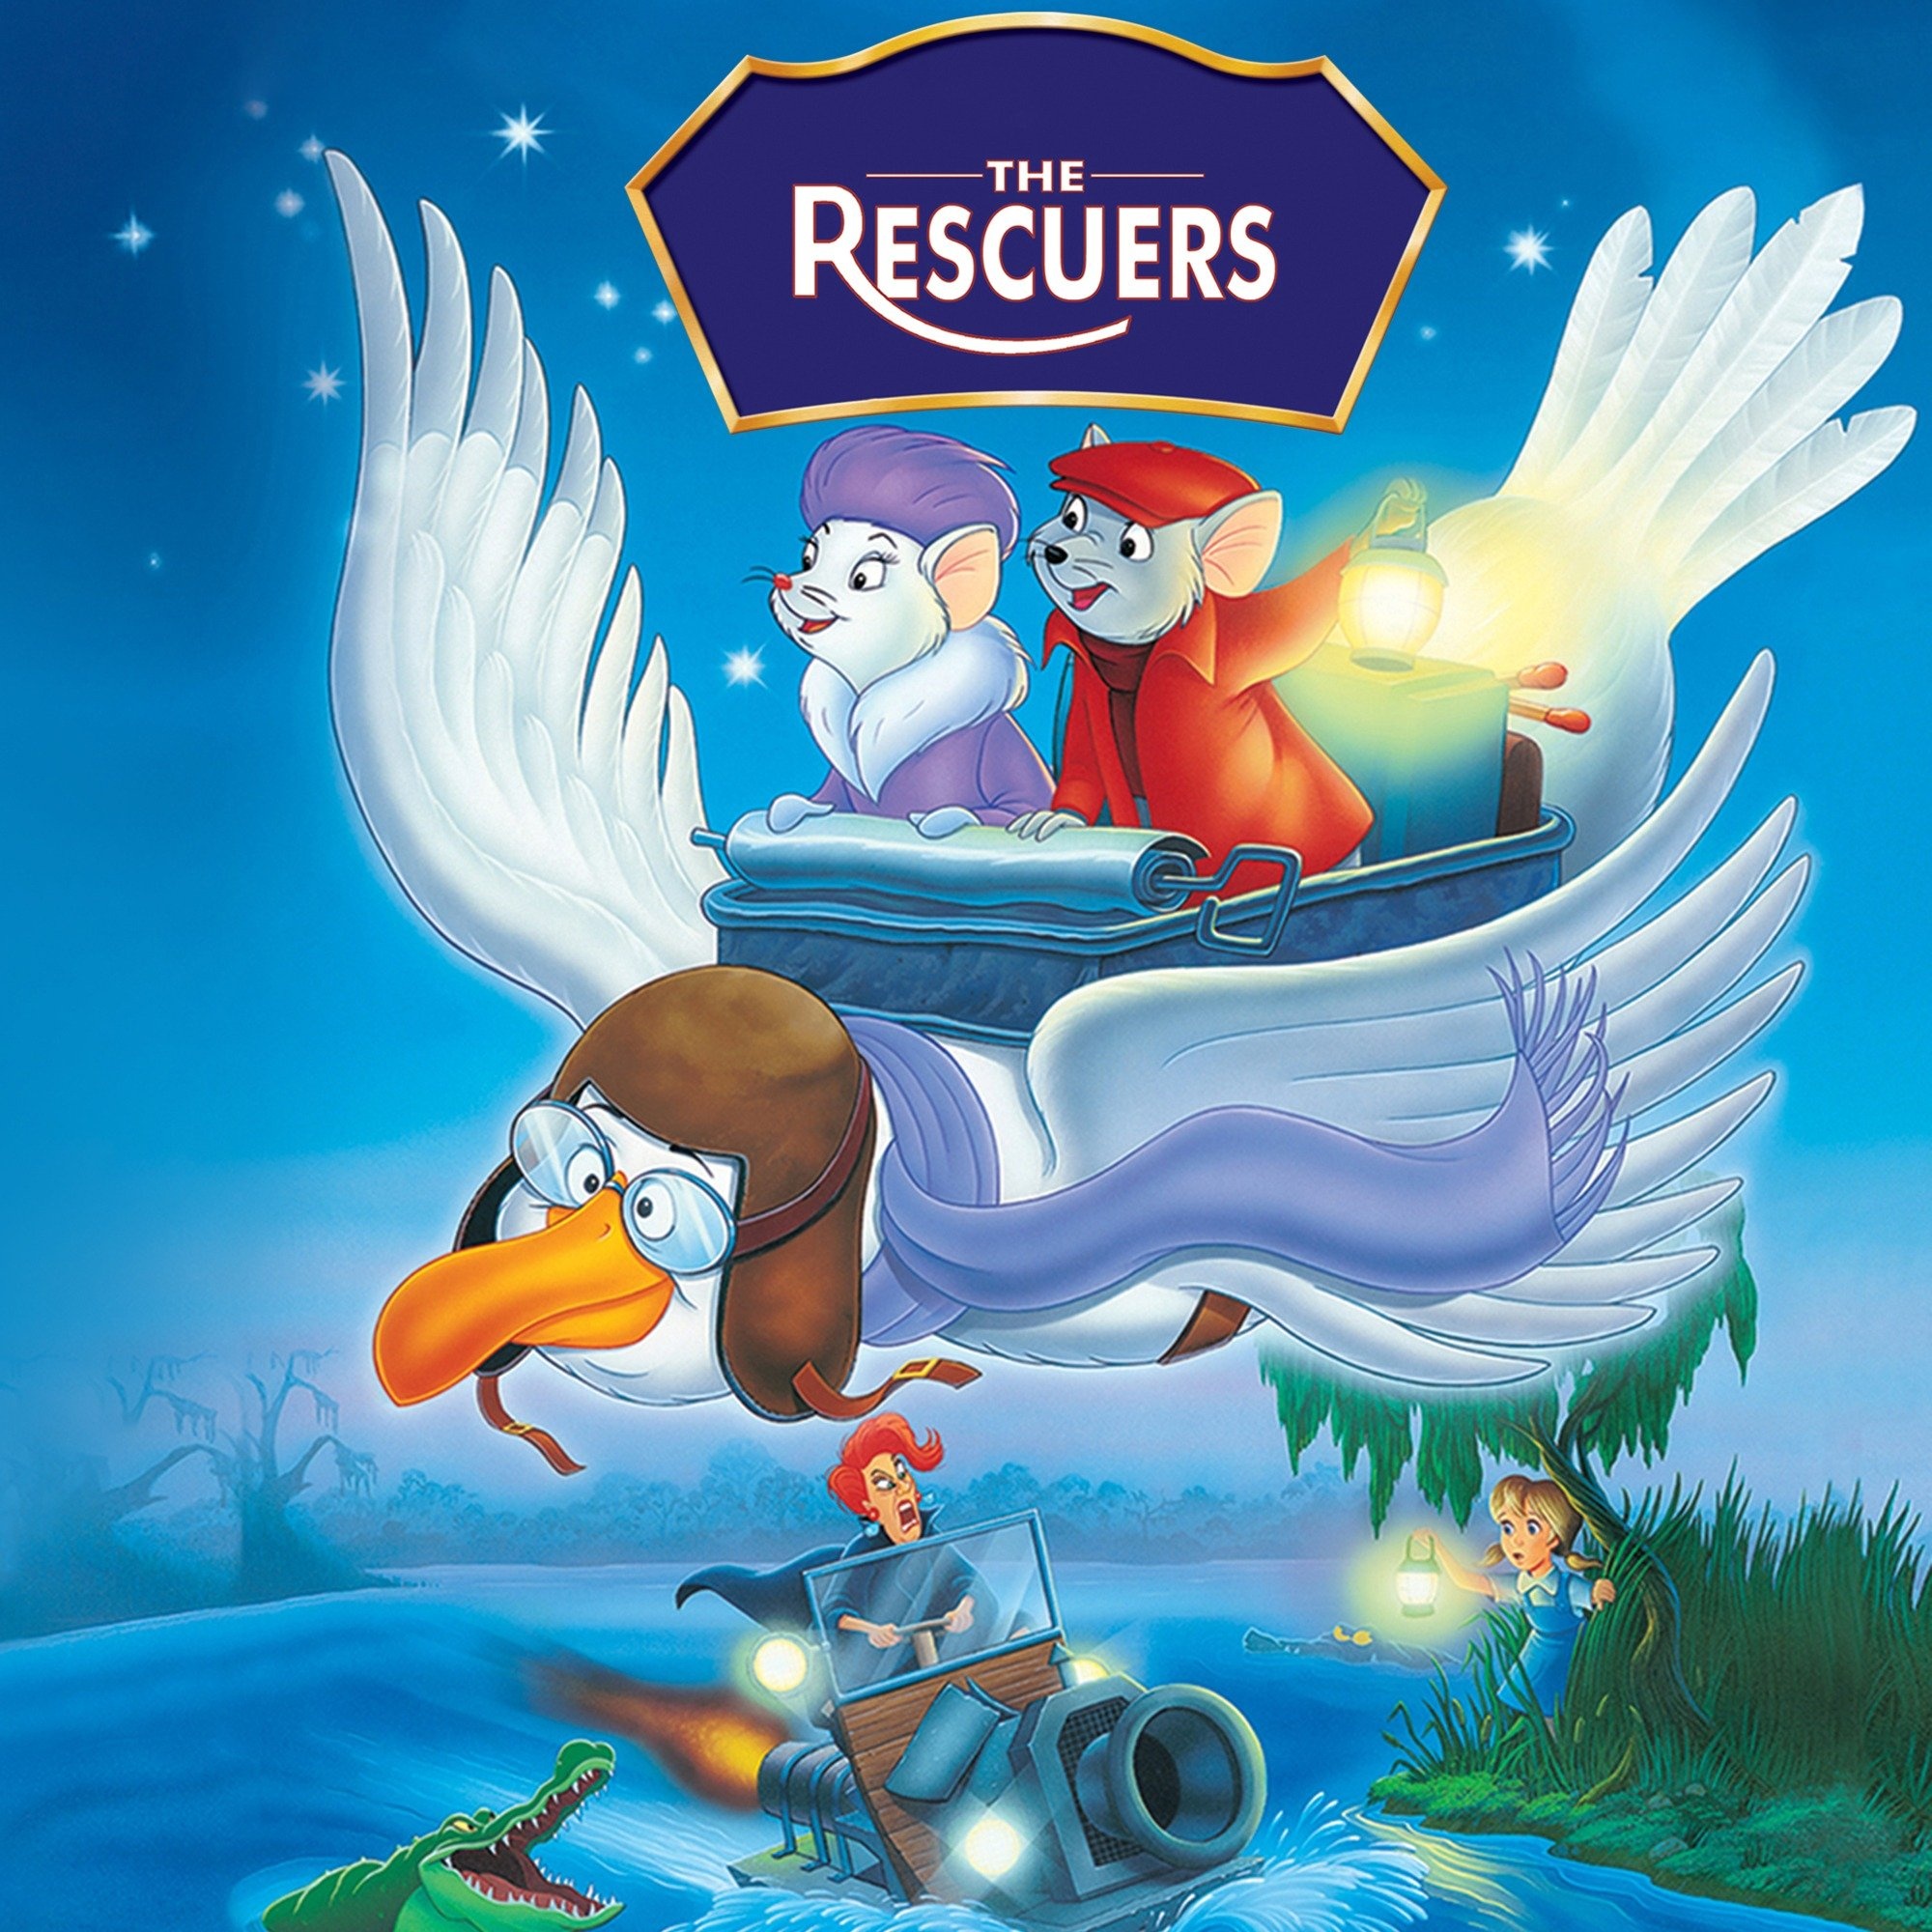 The Rescuers, Full movie online, Plex streaming, Exciting adventure, 2000x2000 HD Phone